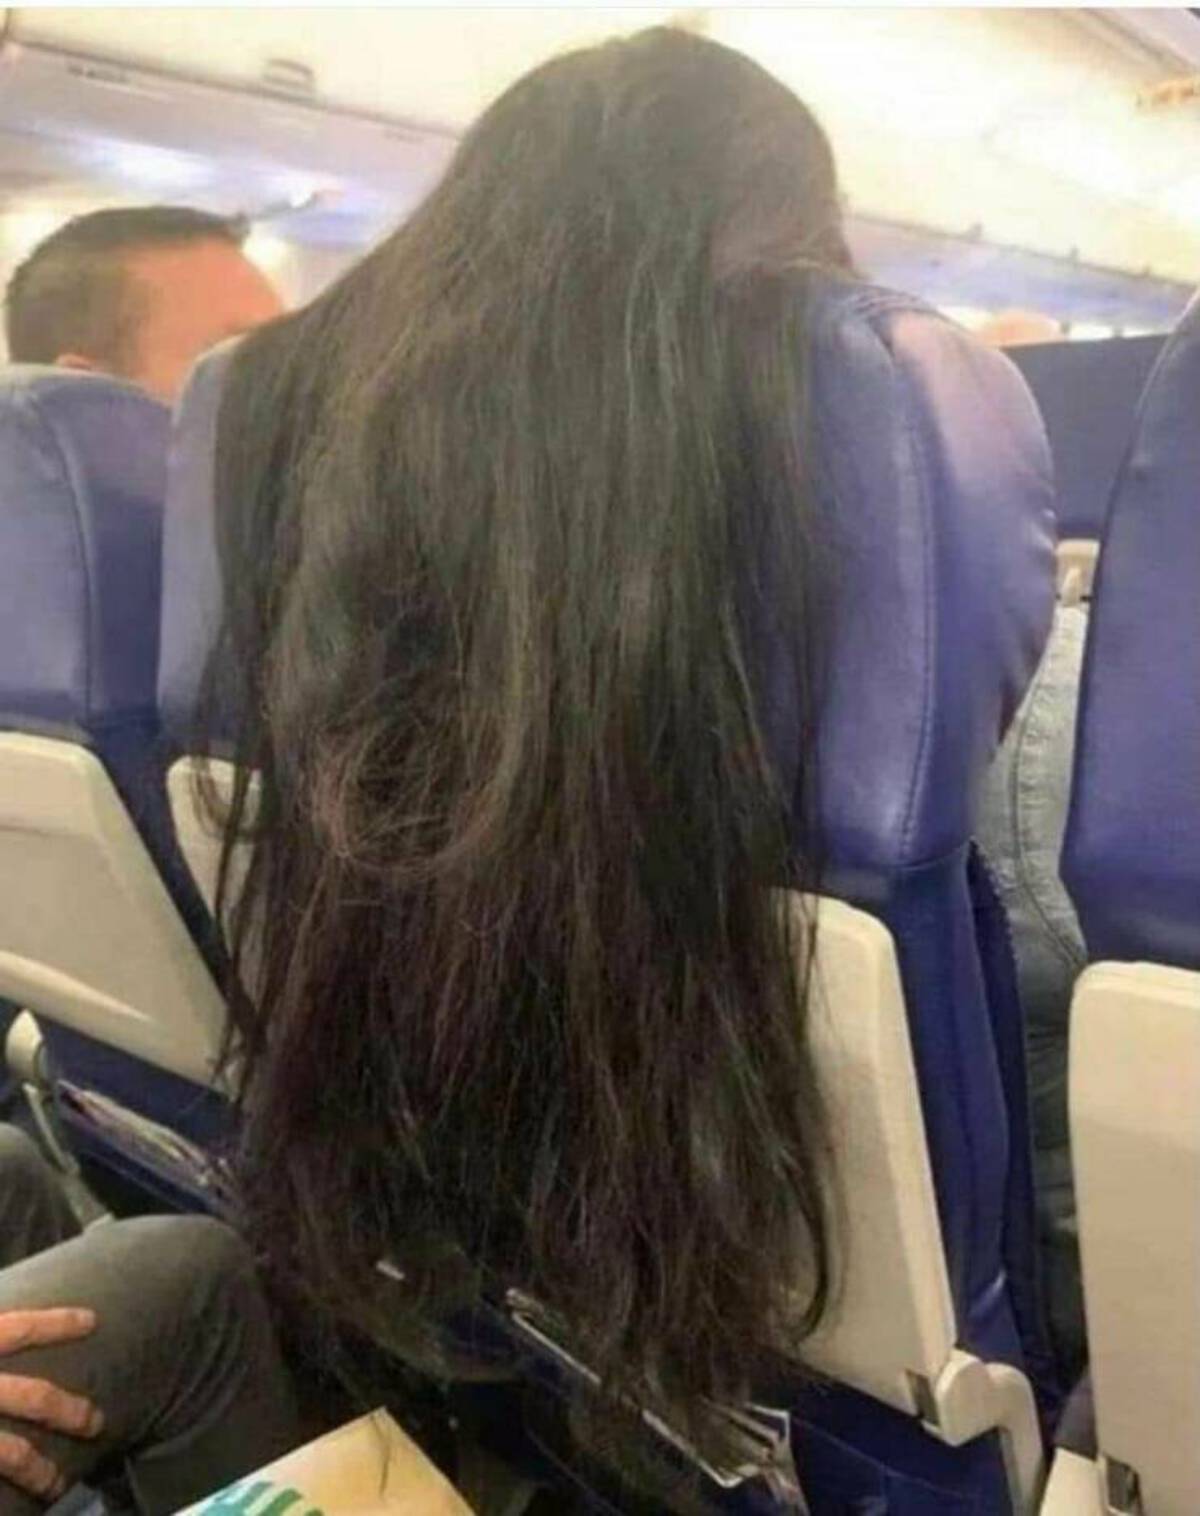 hair over airplane seat